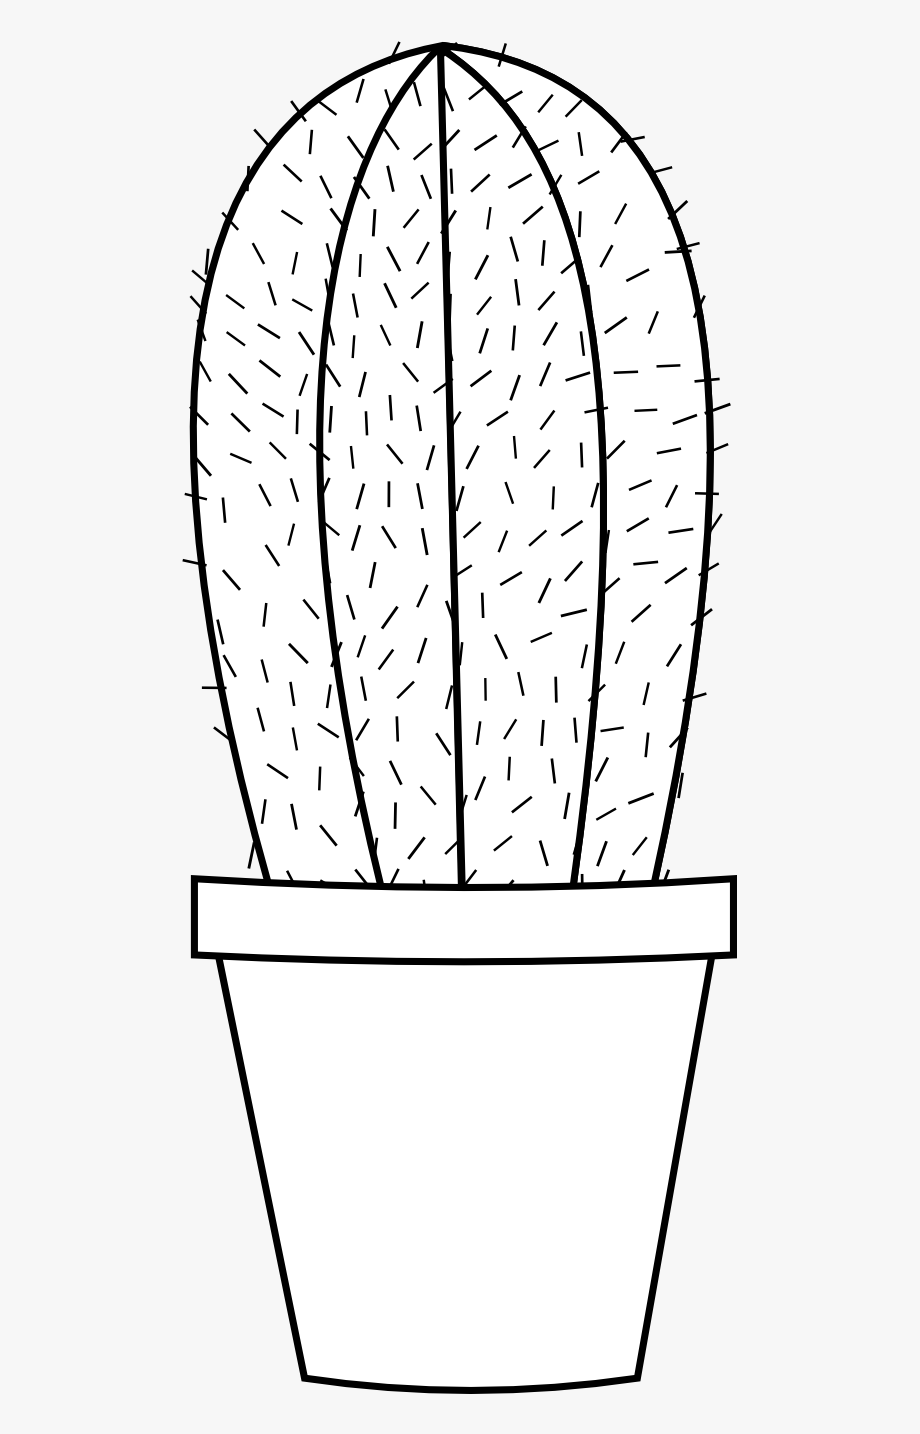 Cactus clipart outline, Cactus outline Transparent FREE for download on